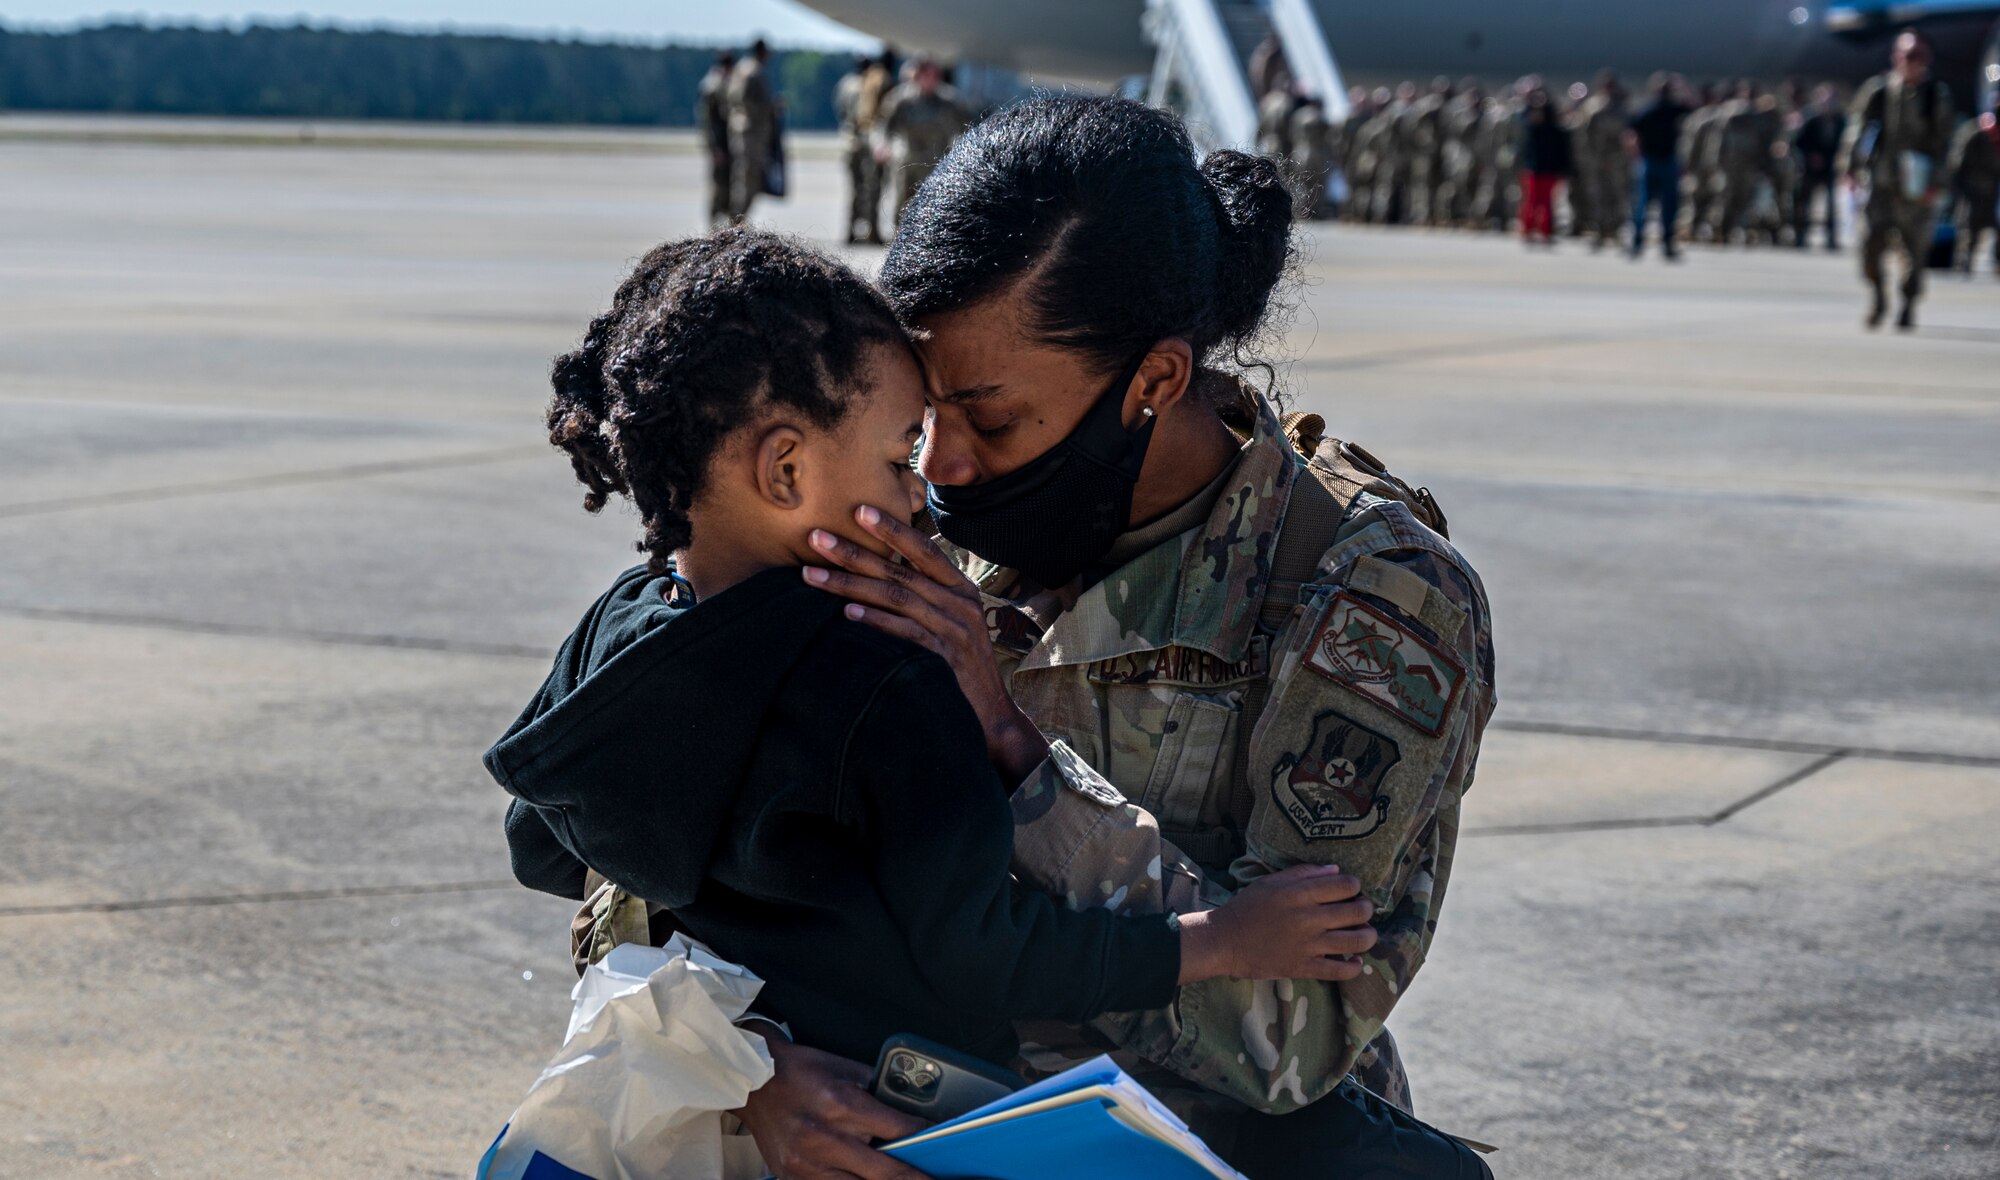 A photo of an Airman embracing a child on the flightline.